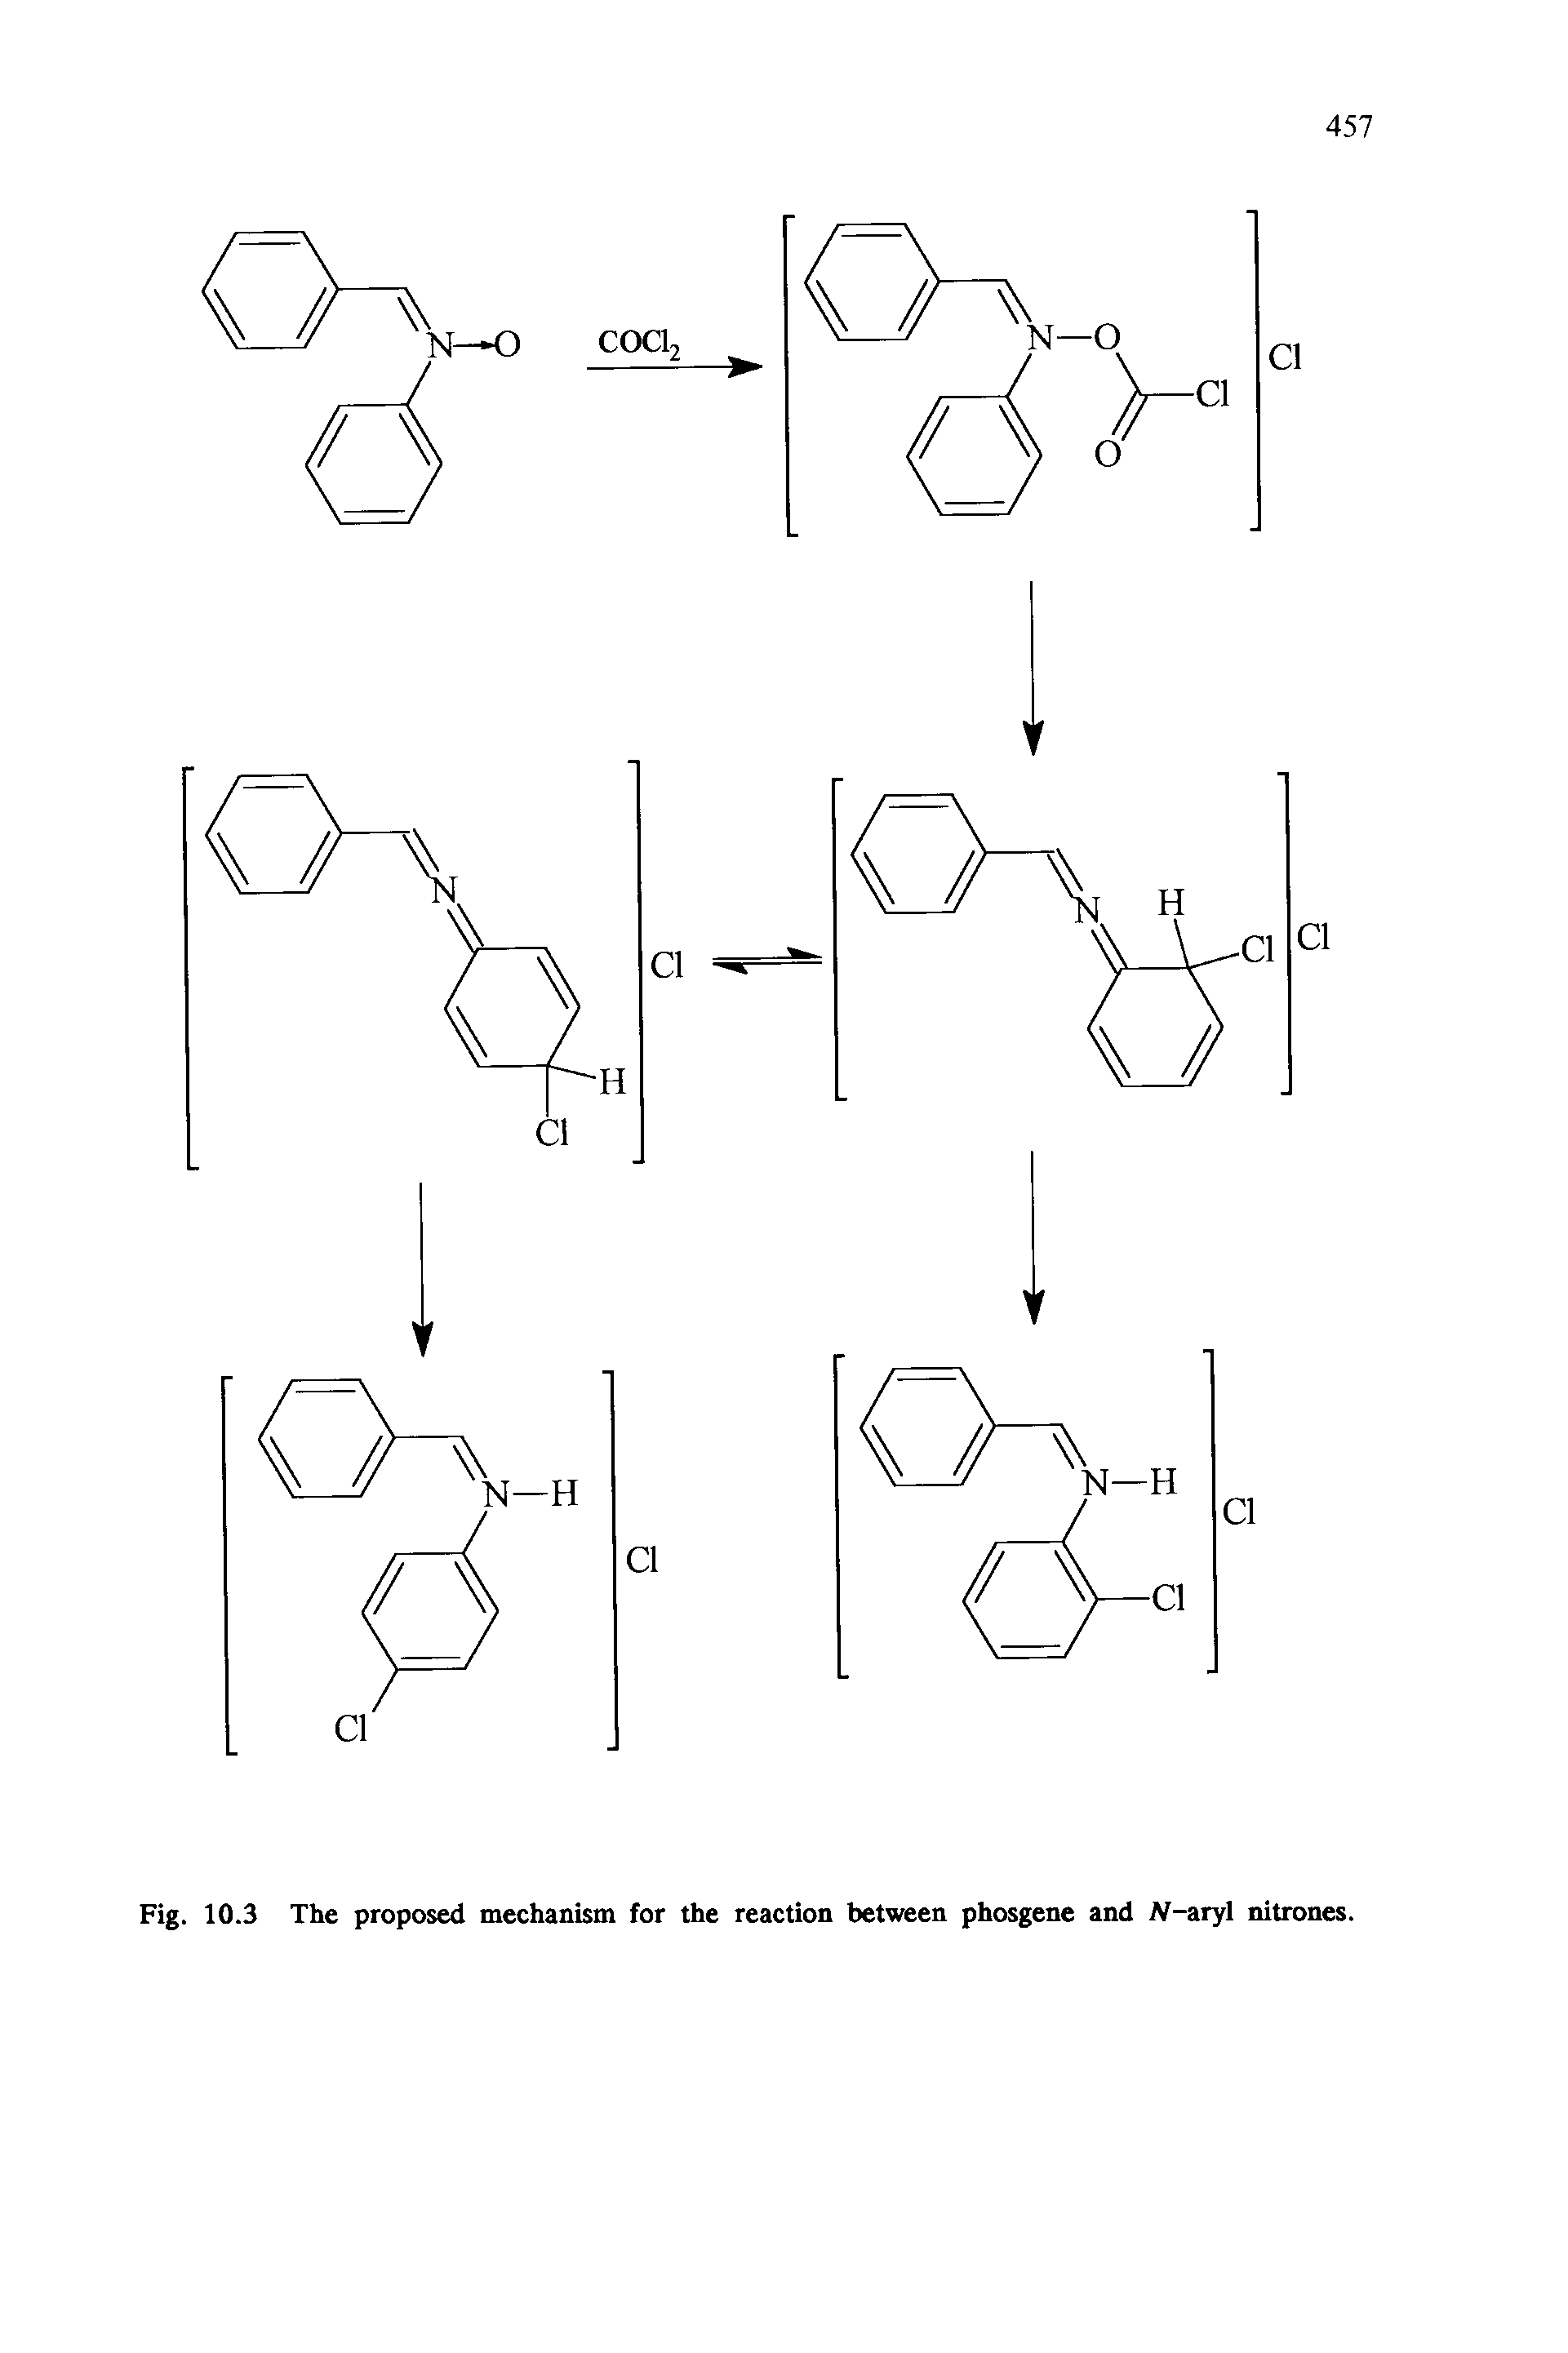 Fig. 10.3 The proposed mechanism for the reaction between phosgene and iV-aryl nitrones.